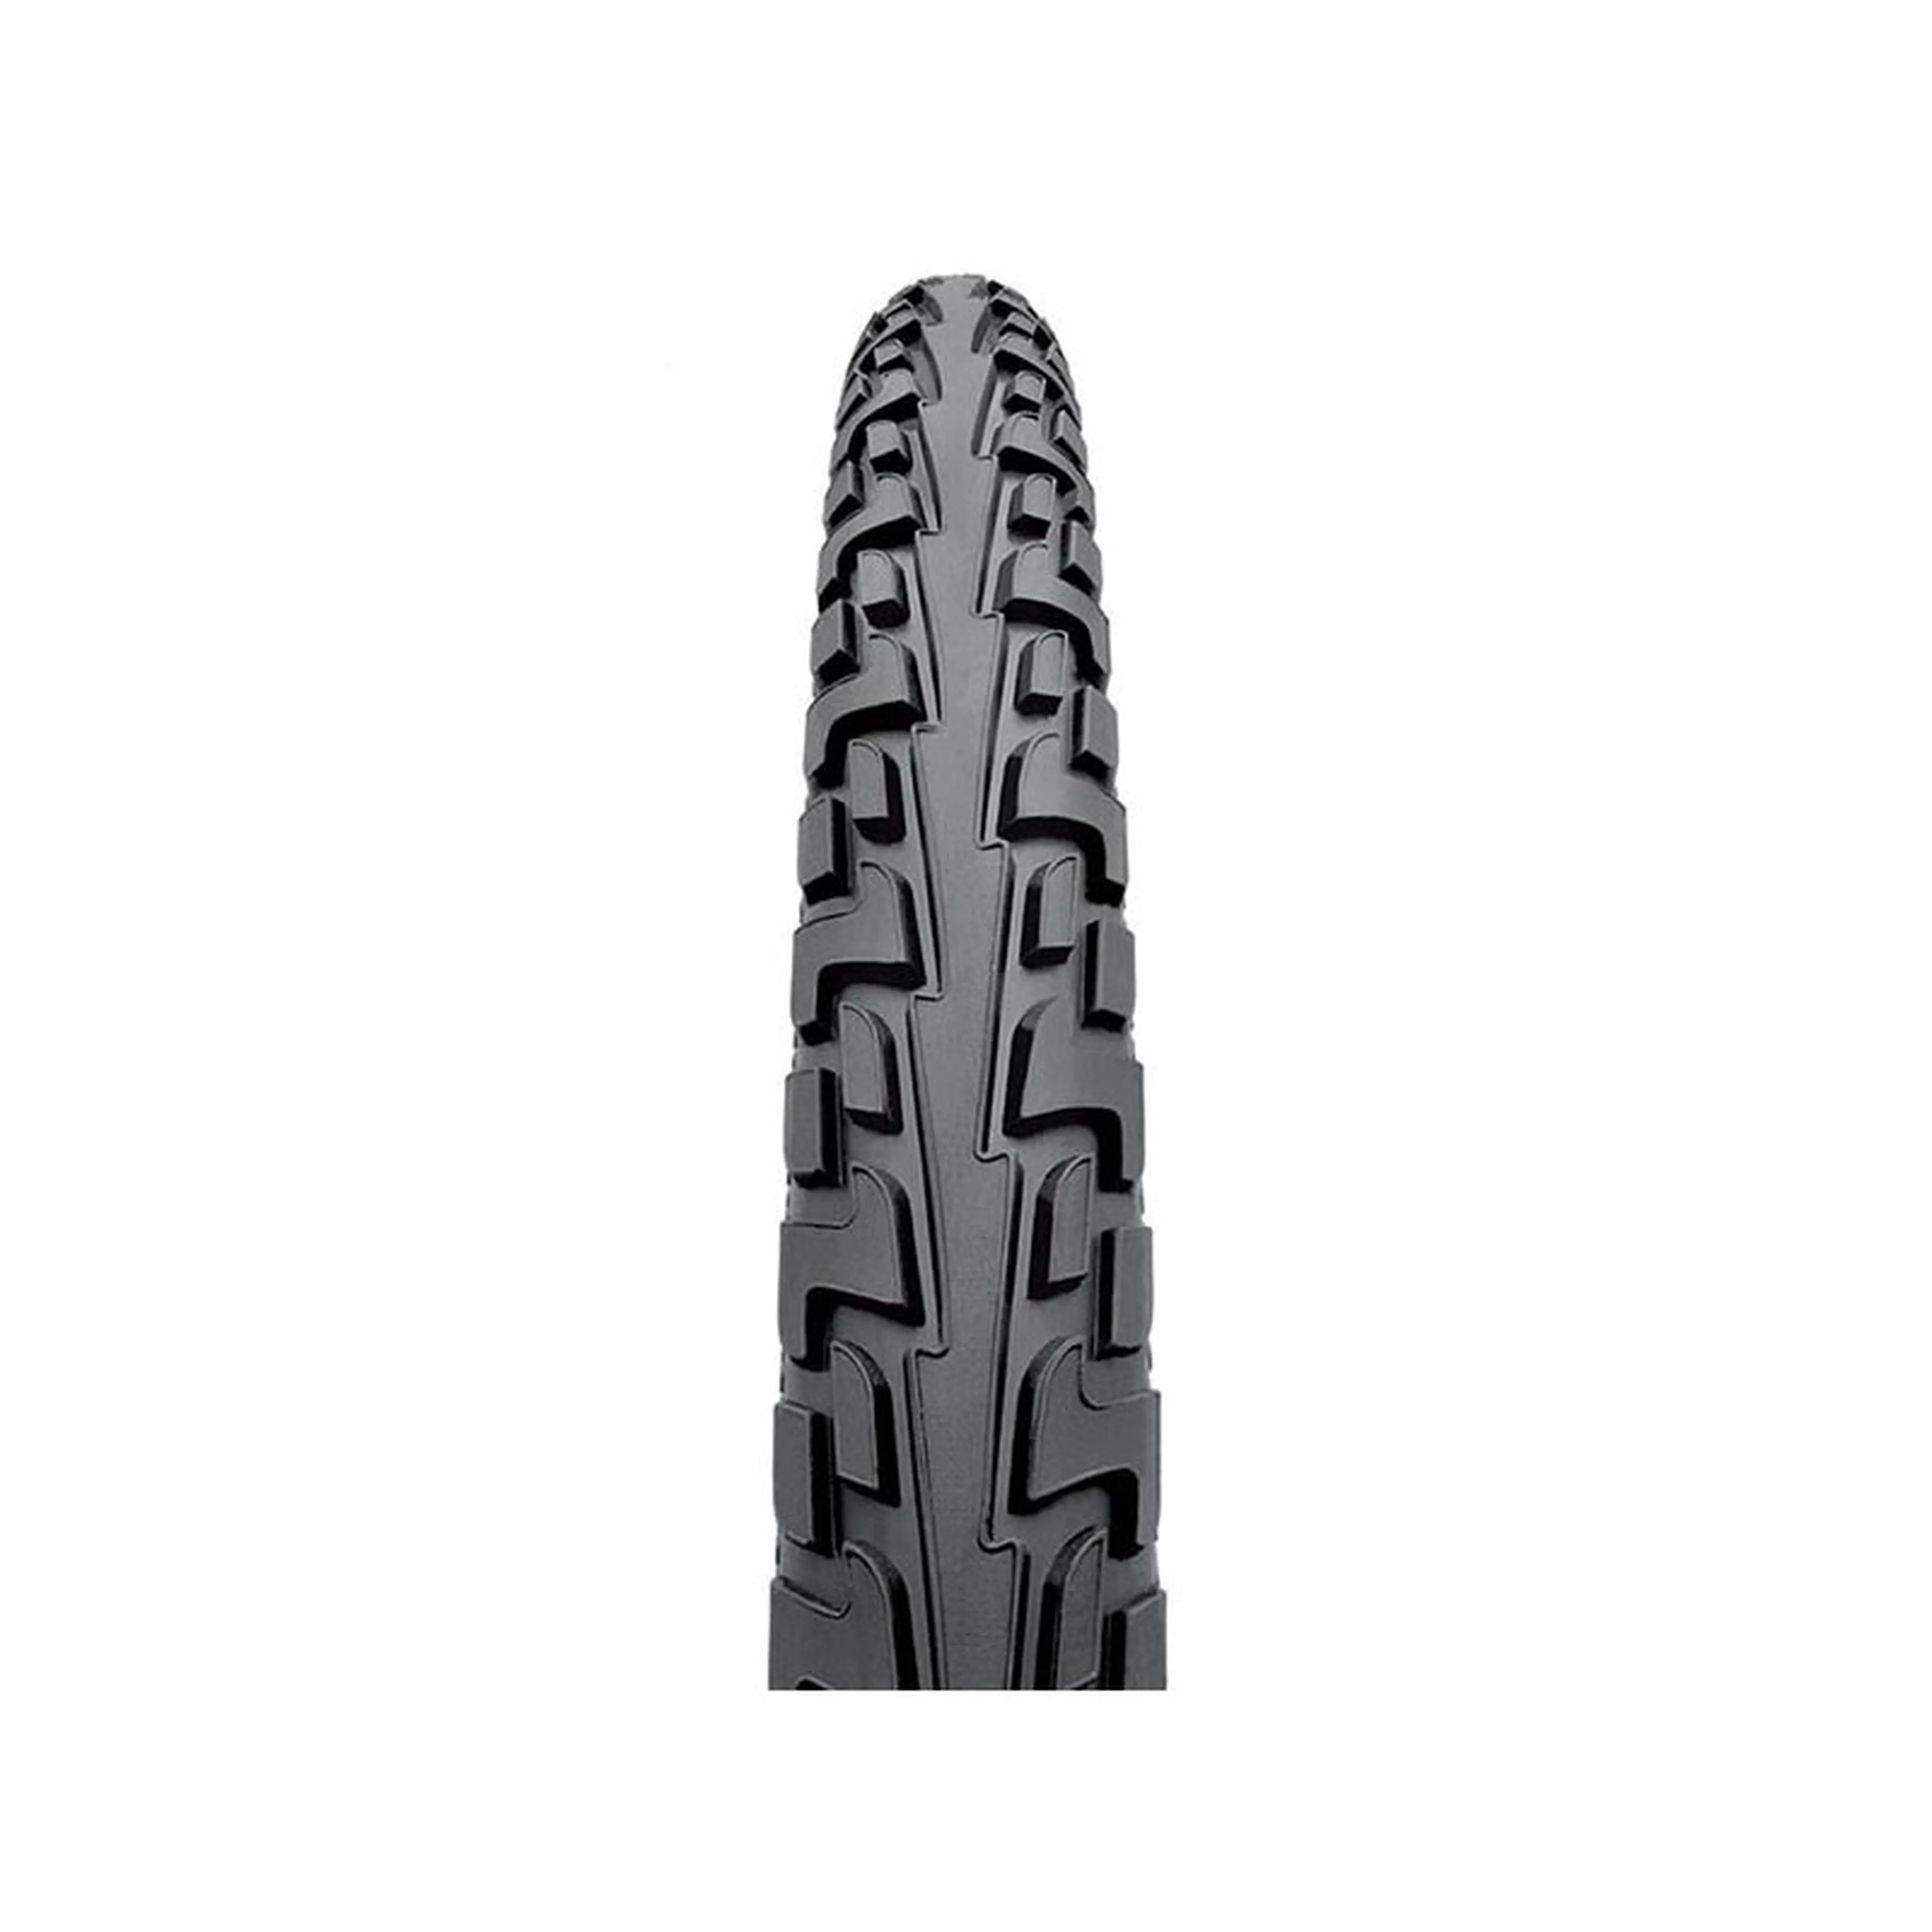 3. Anvelopa Continental Ride Tour Puncture-ProTection 28-622 - 101151